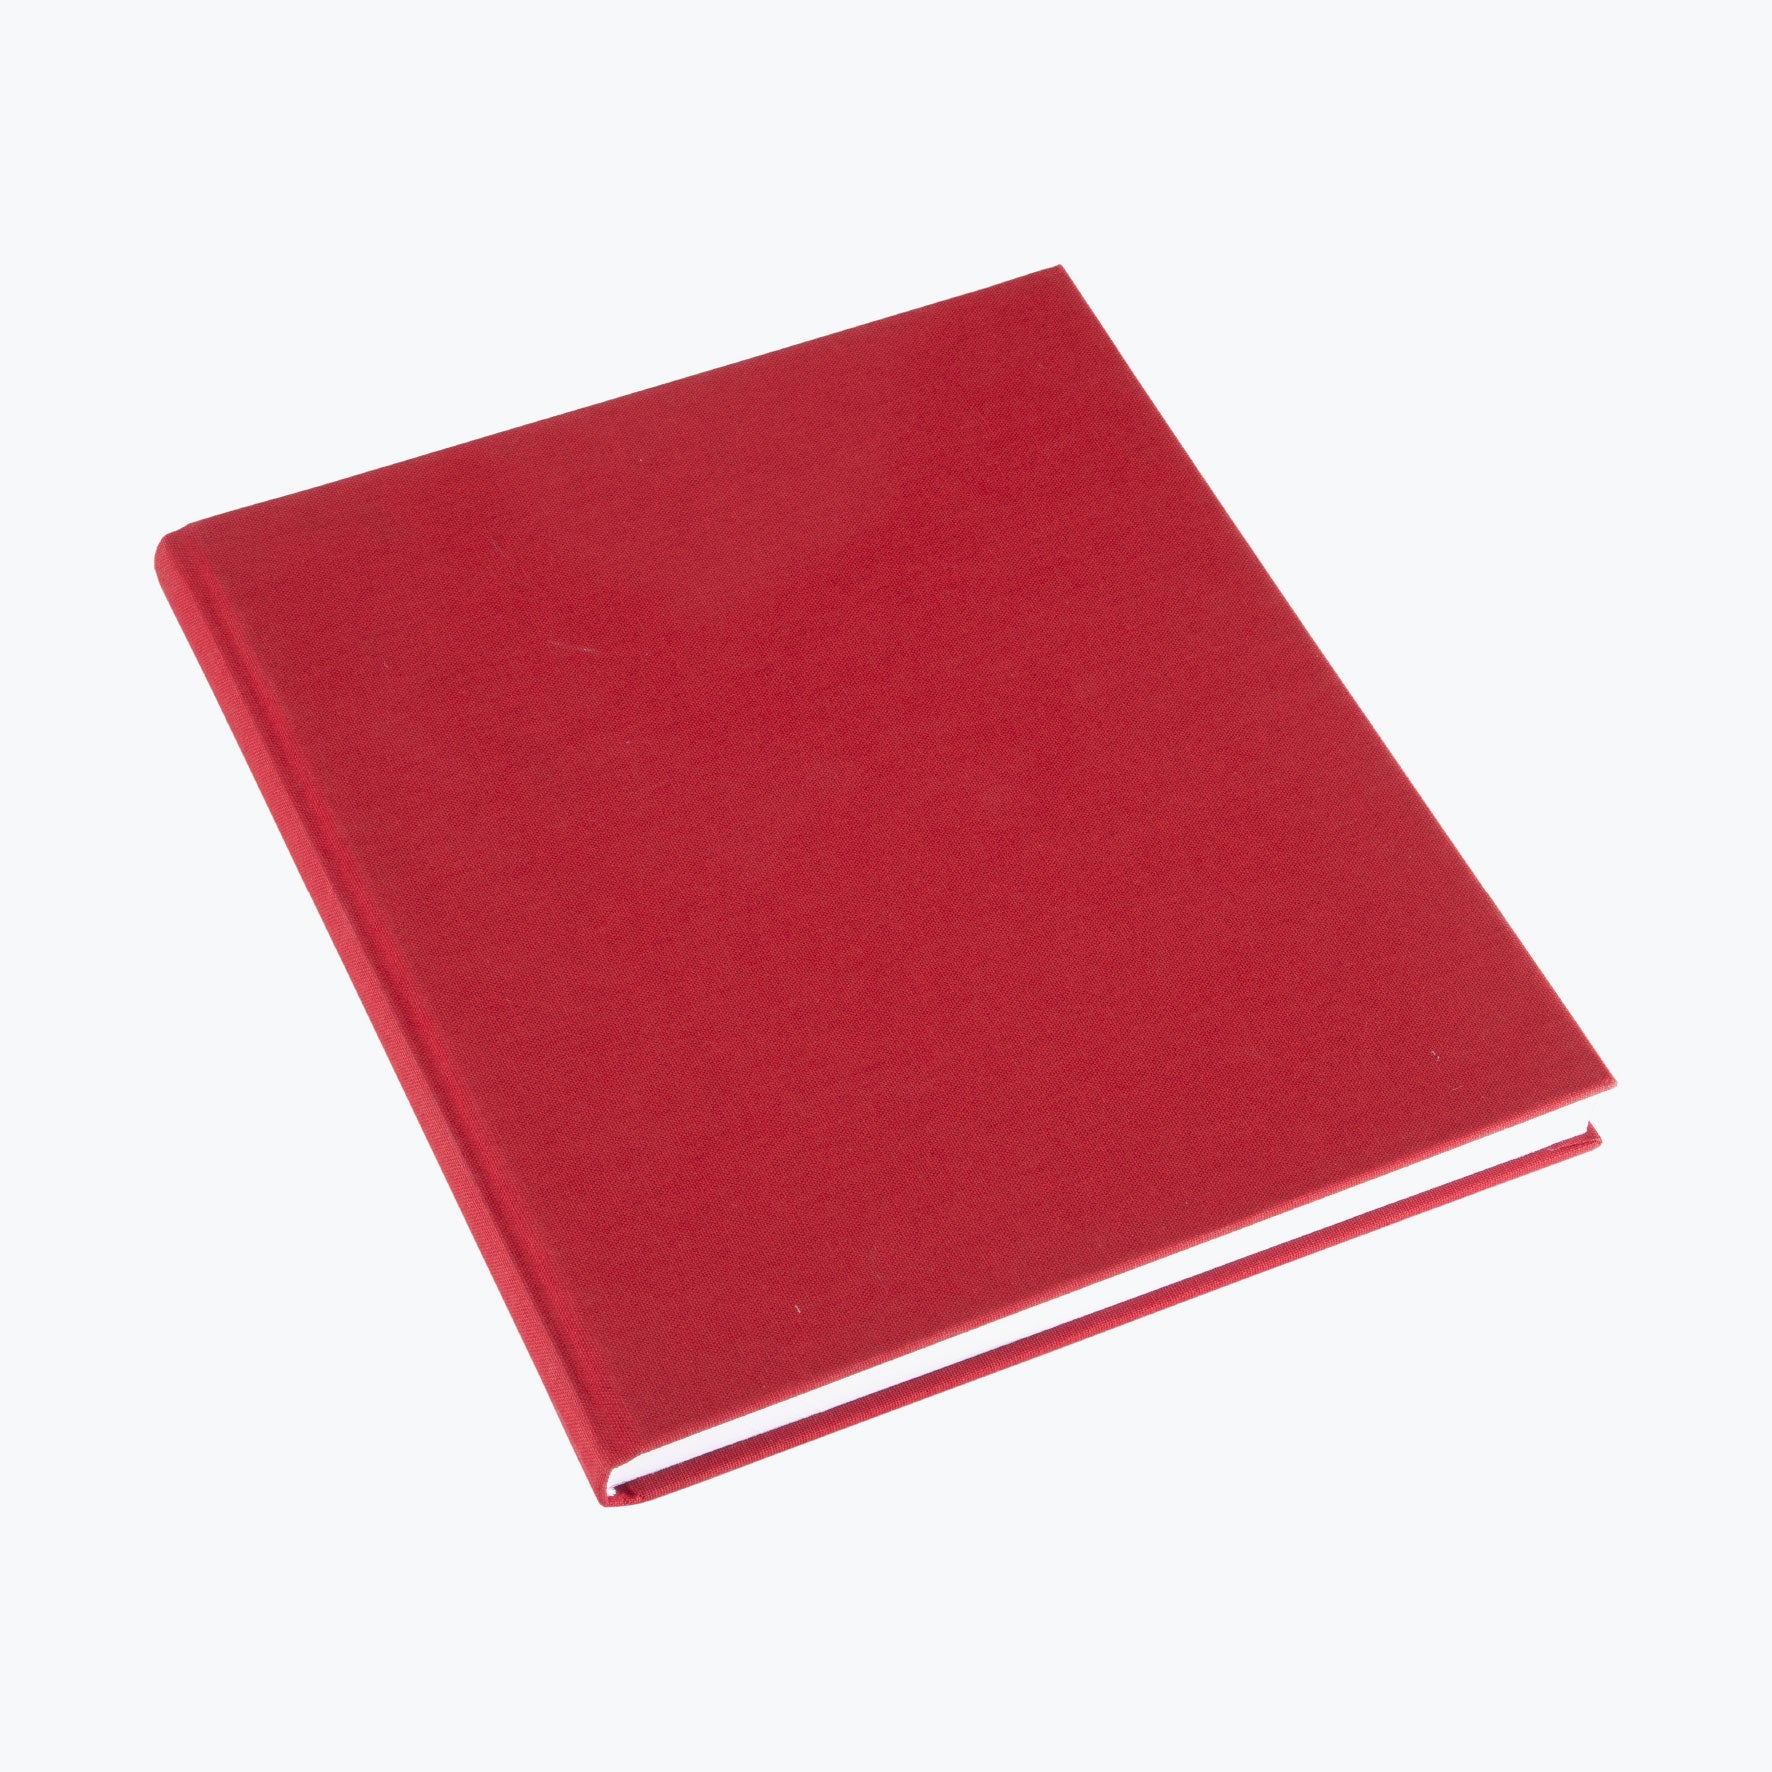 Bookbinders Design - Cloth Notebook - Large - Red  <Outgoing>